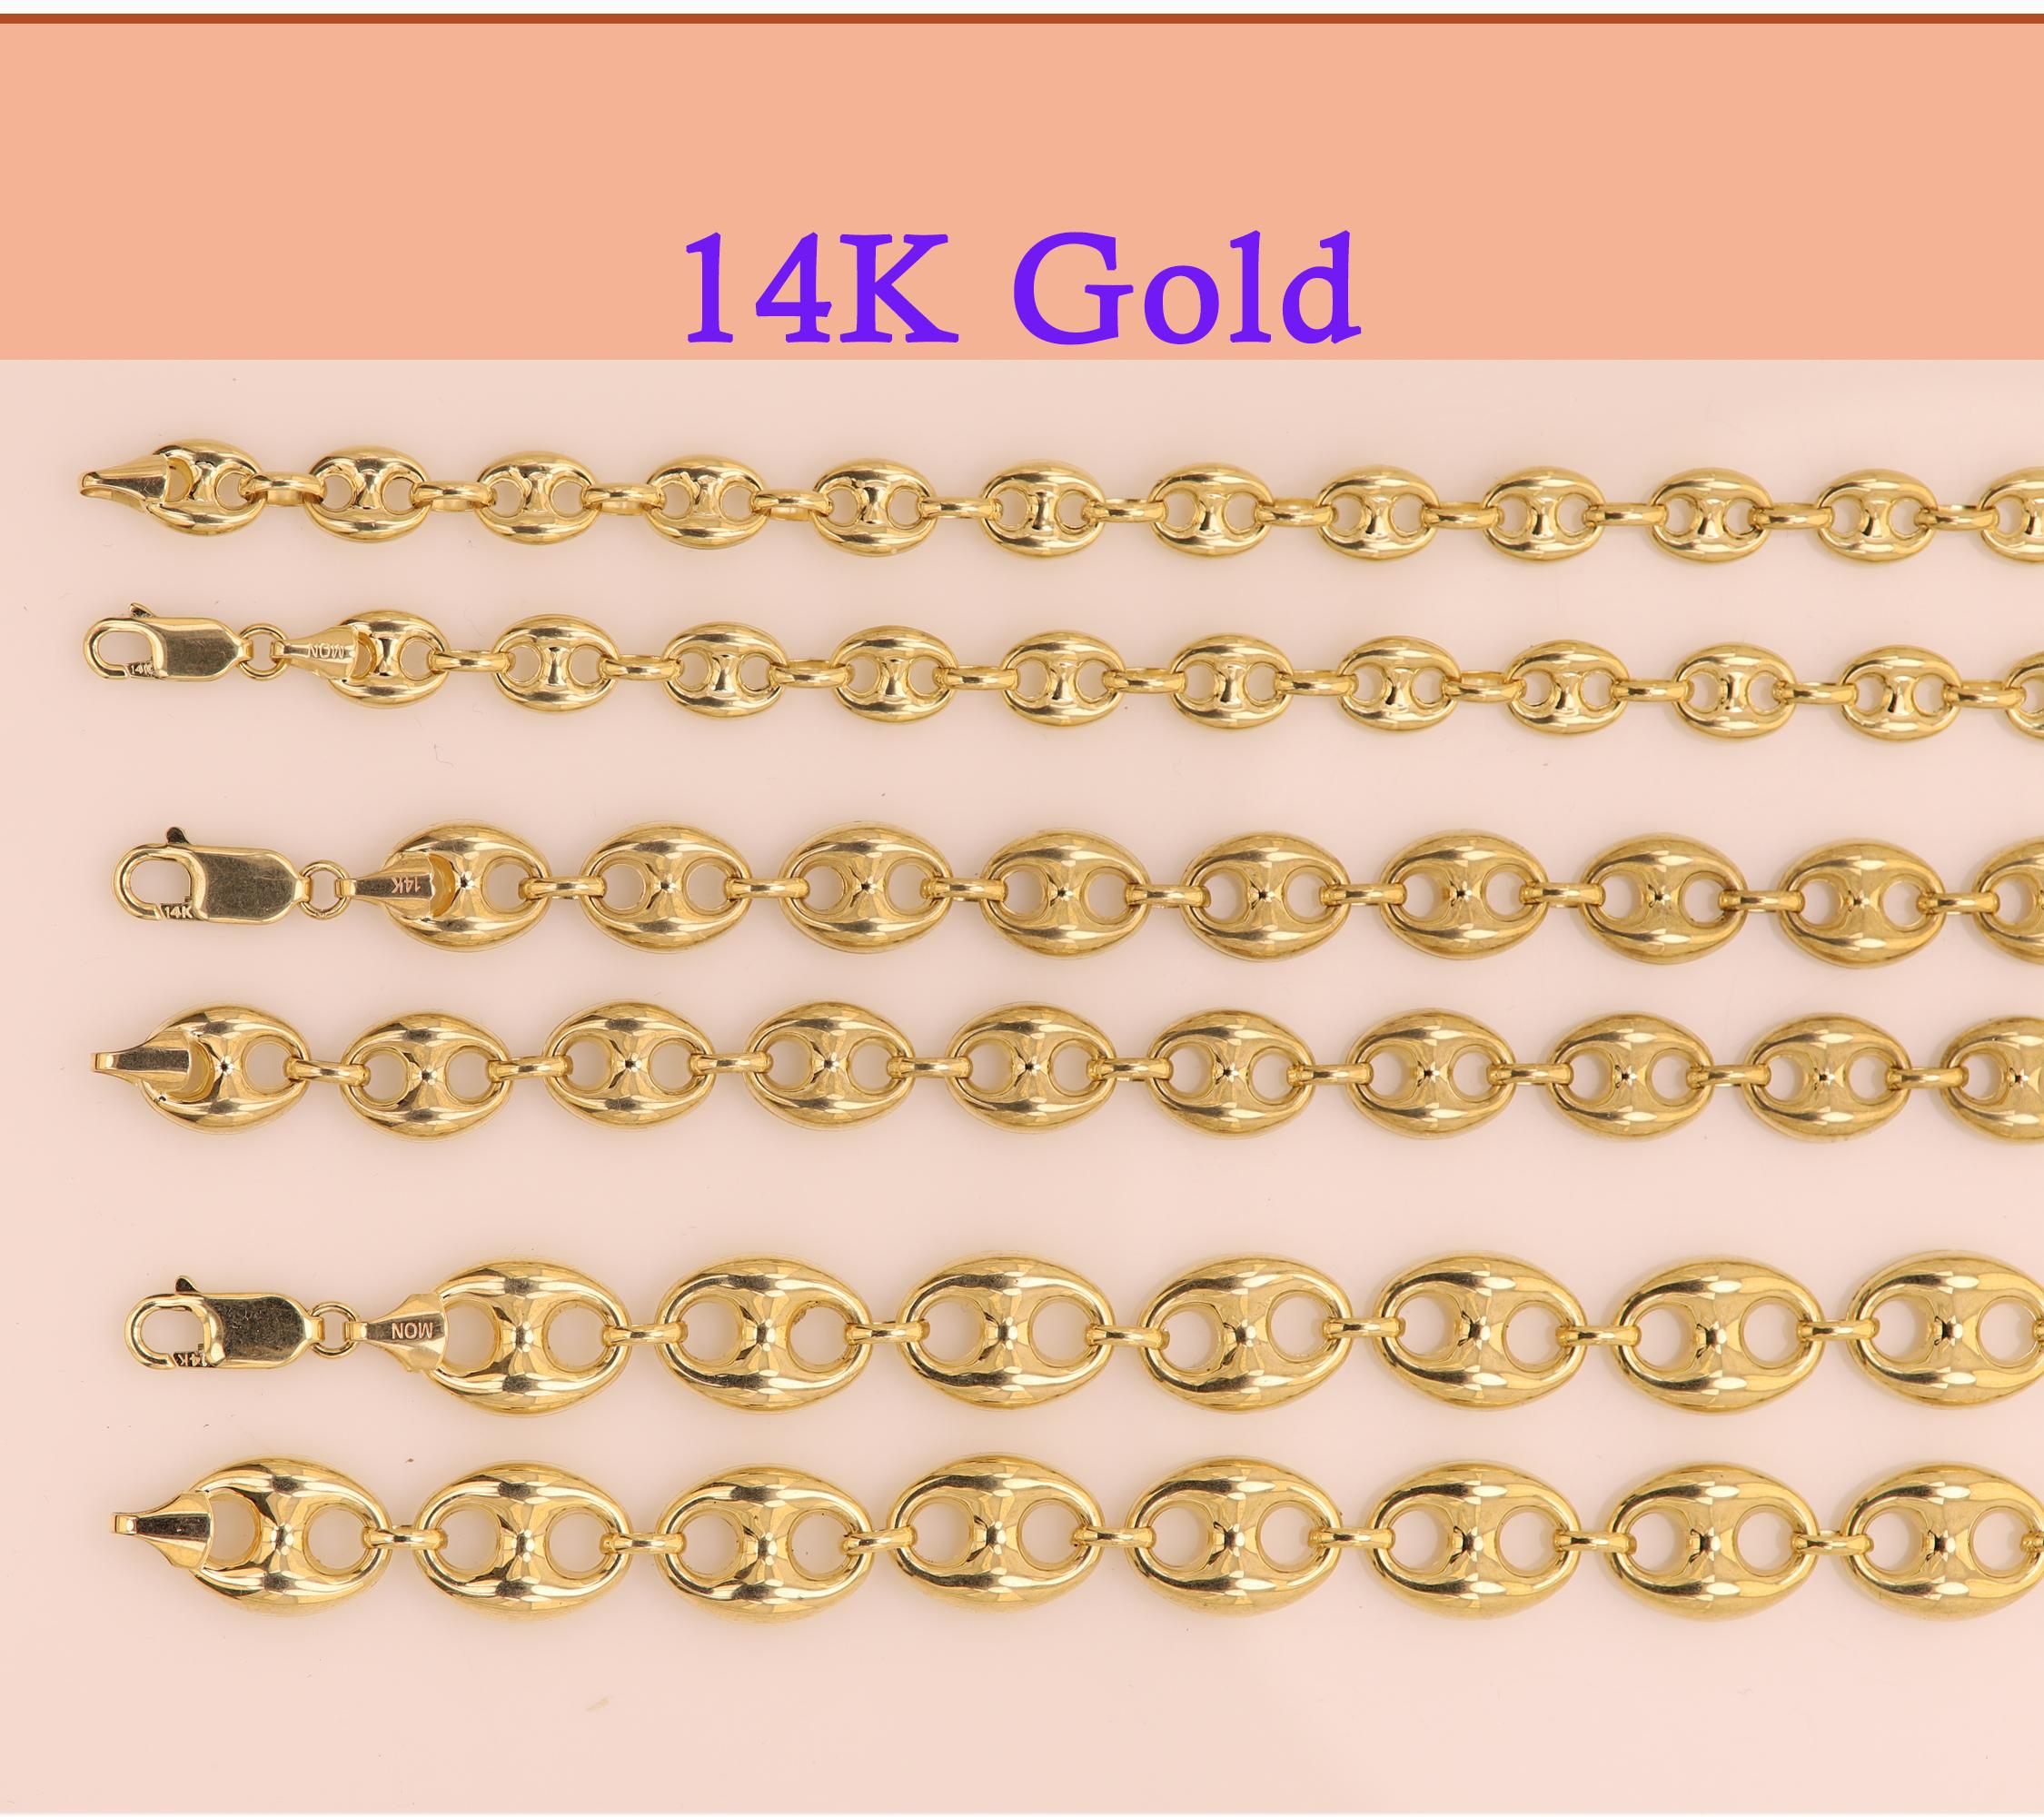 Puffed Anchor Italian Gold Necklace Chain Mariner Link Chain Solid 14 Karat Gold 7